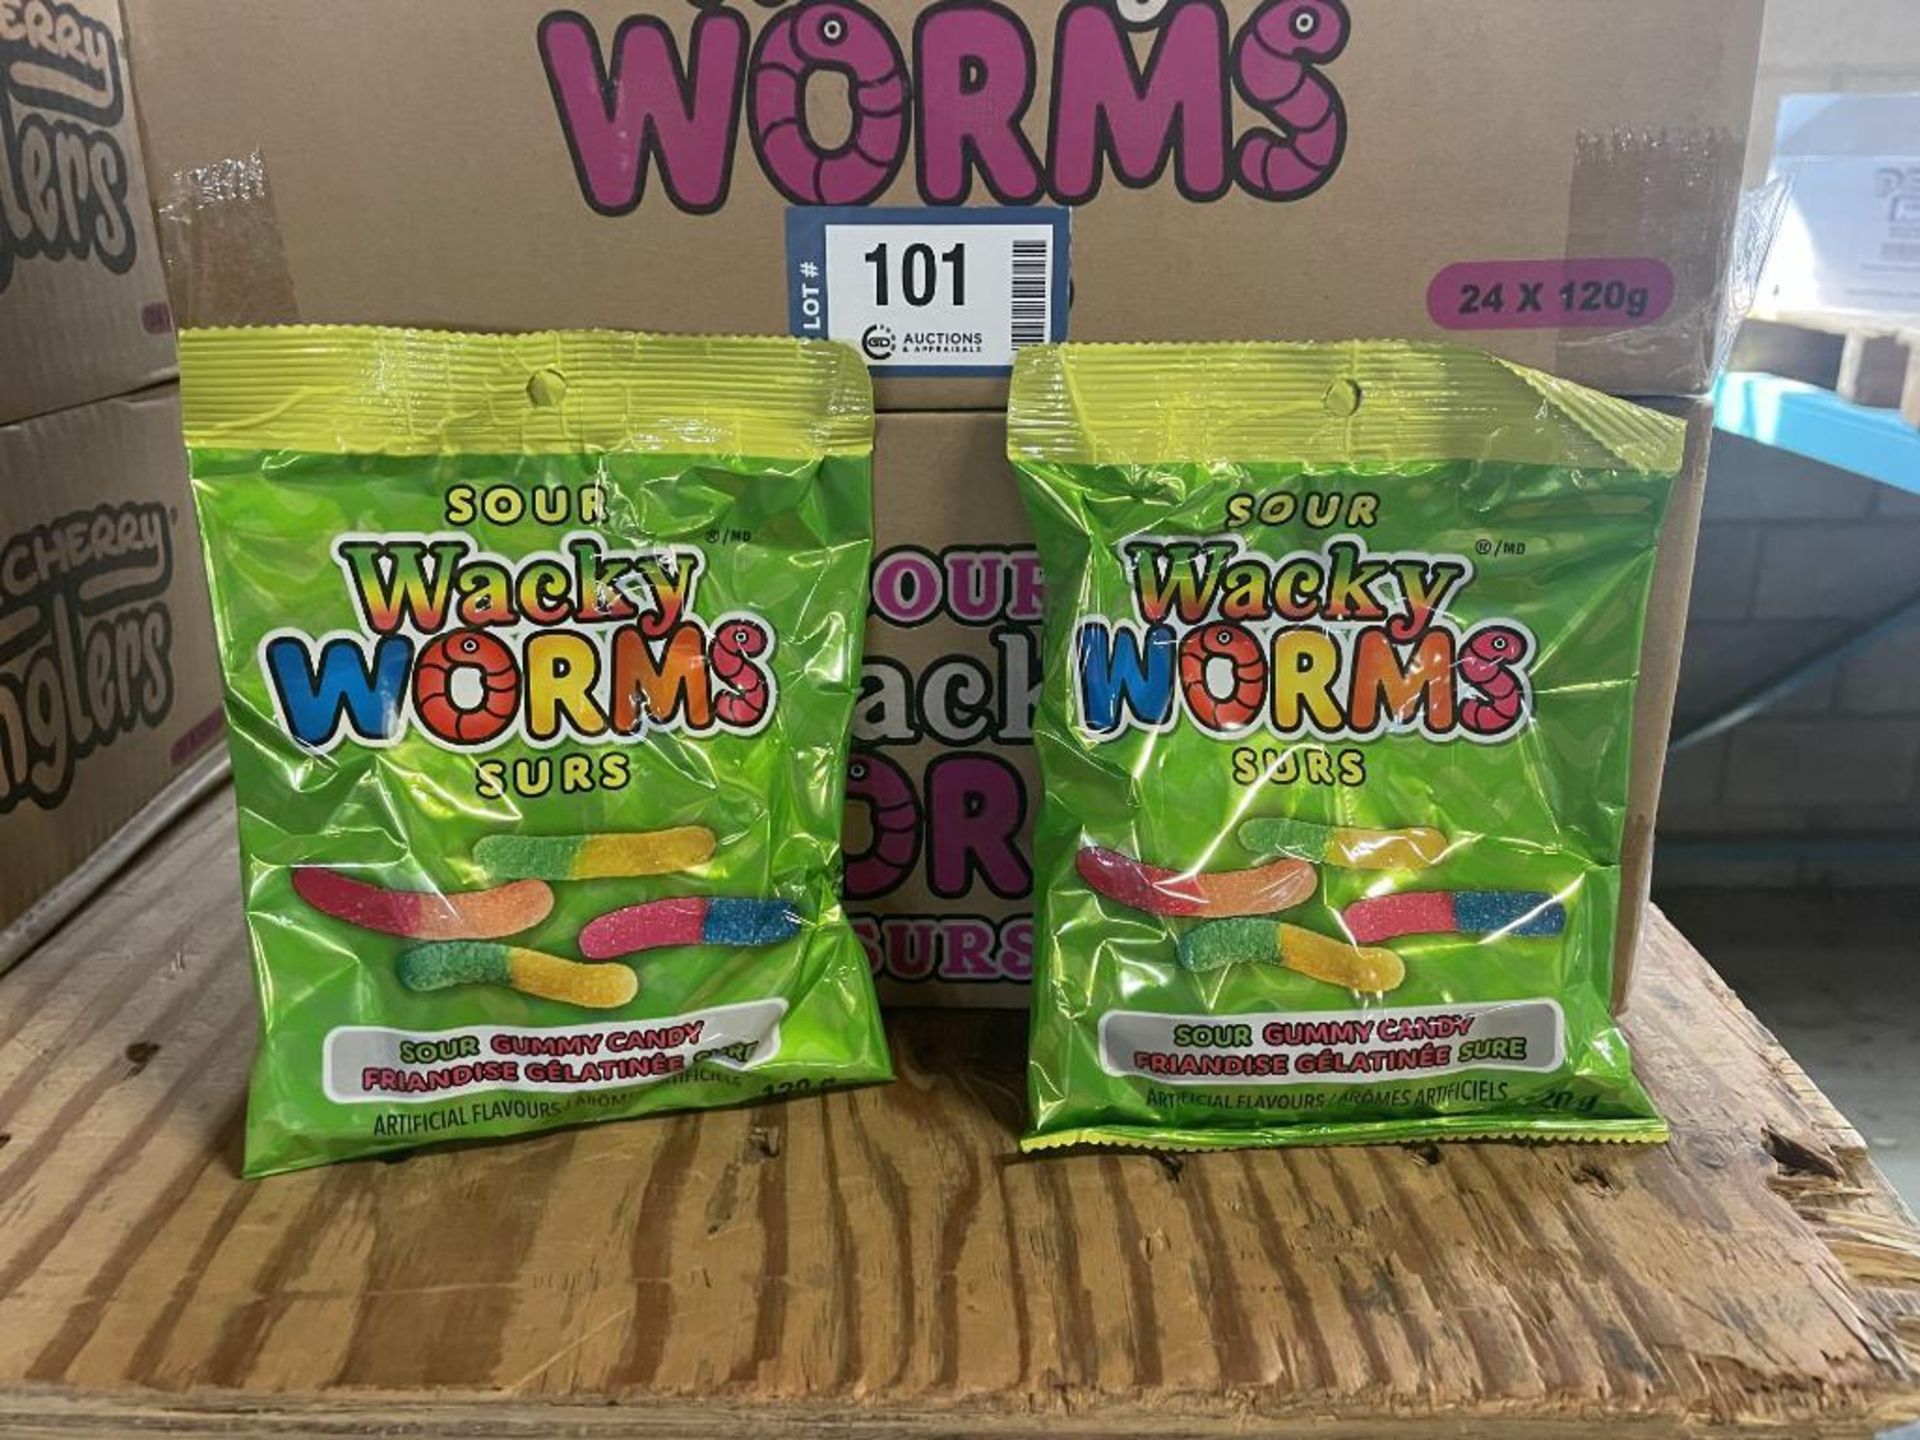 (5) BOXES OF SOUR WACKY WORMS, 12/120G PER BOX - Image 2 of 3